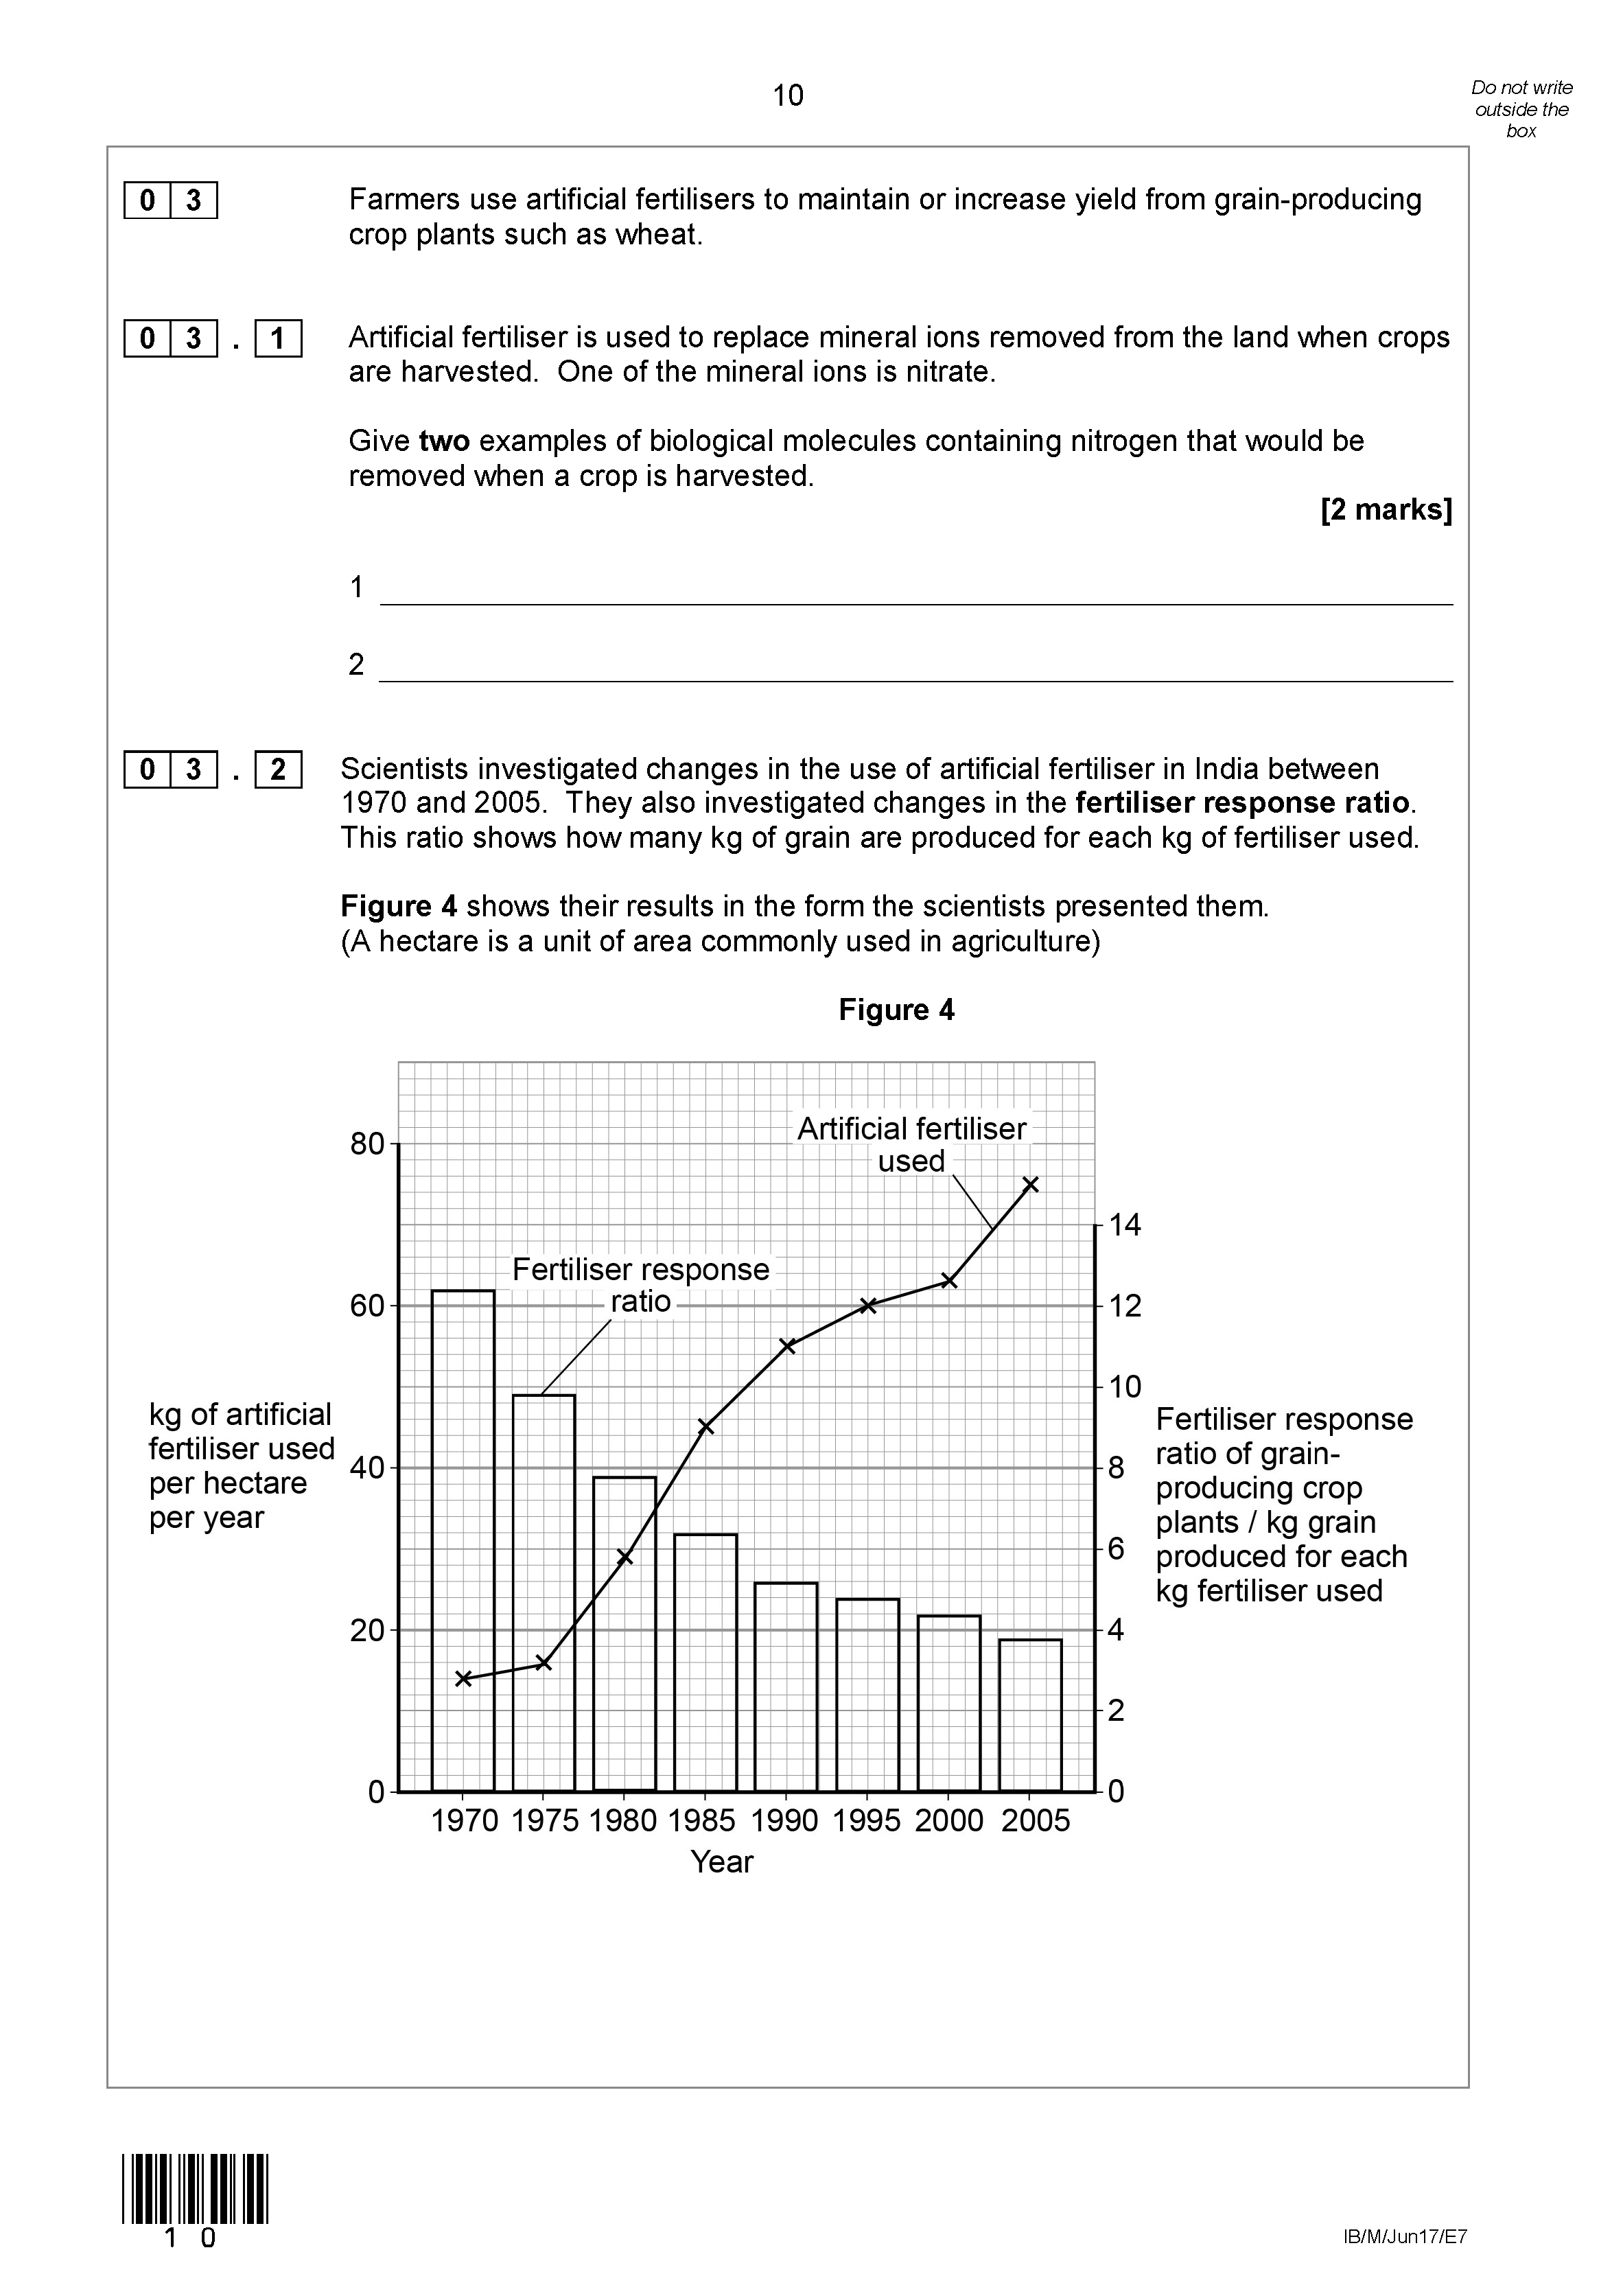 calculationquestionsAQA_Page_12.png